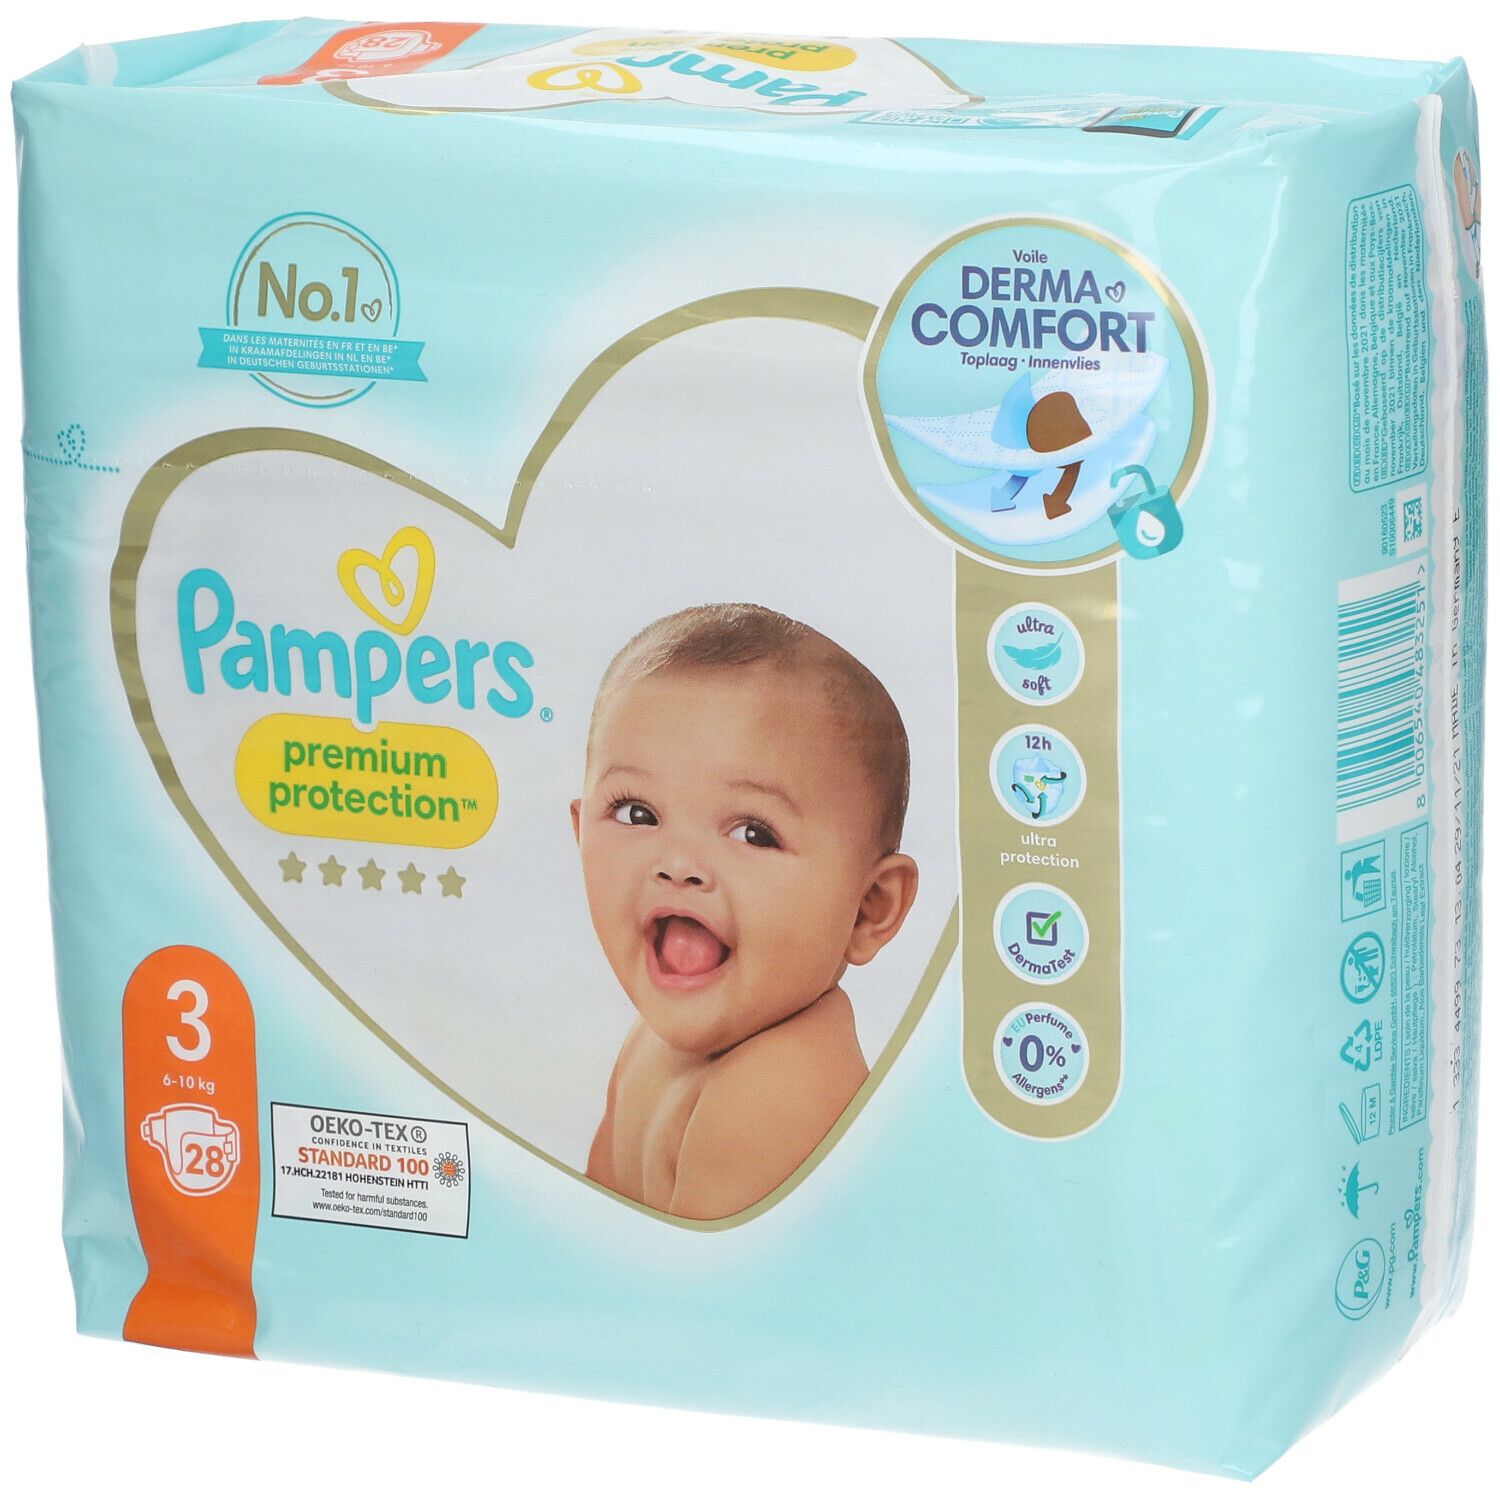 Pampers® Premium Protection™ Couche Taille 3, 6-10 kg 28 pc(s) Couches